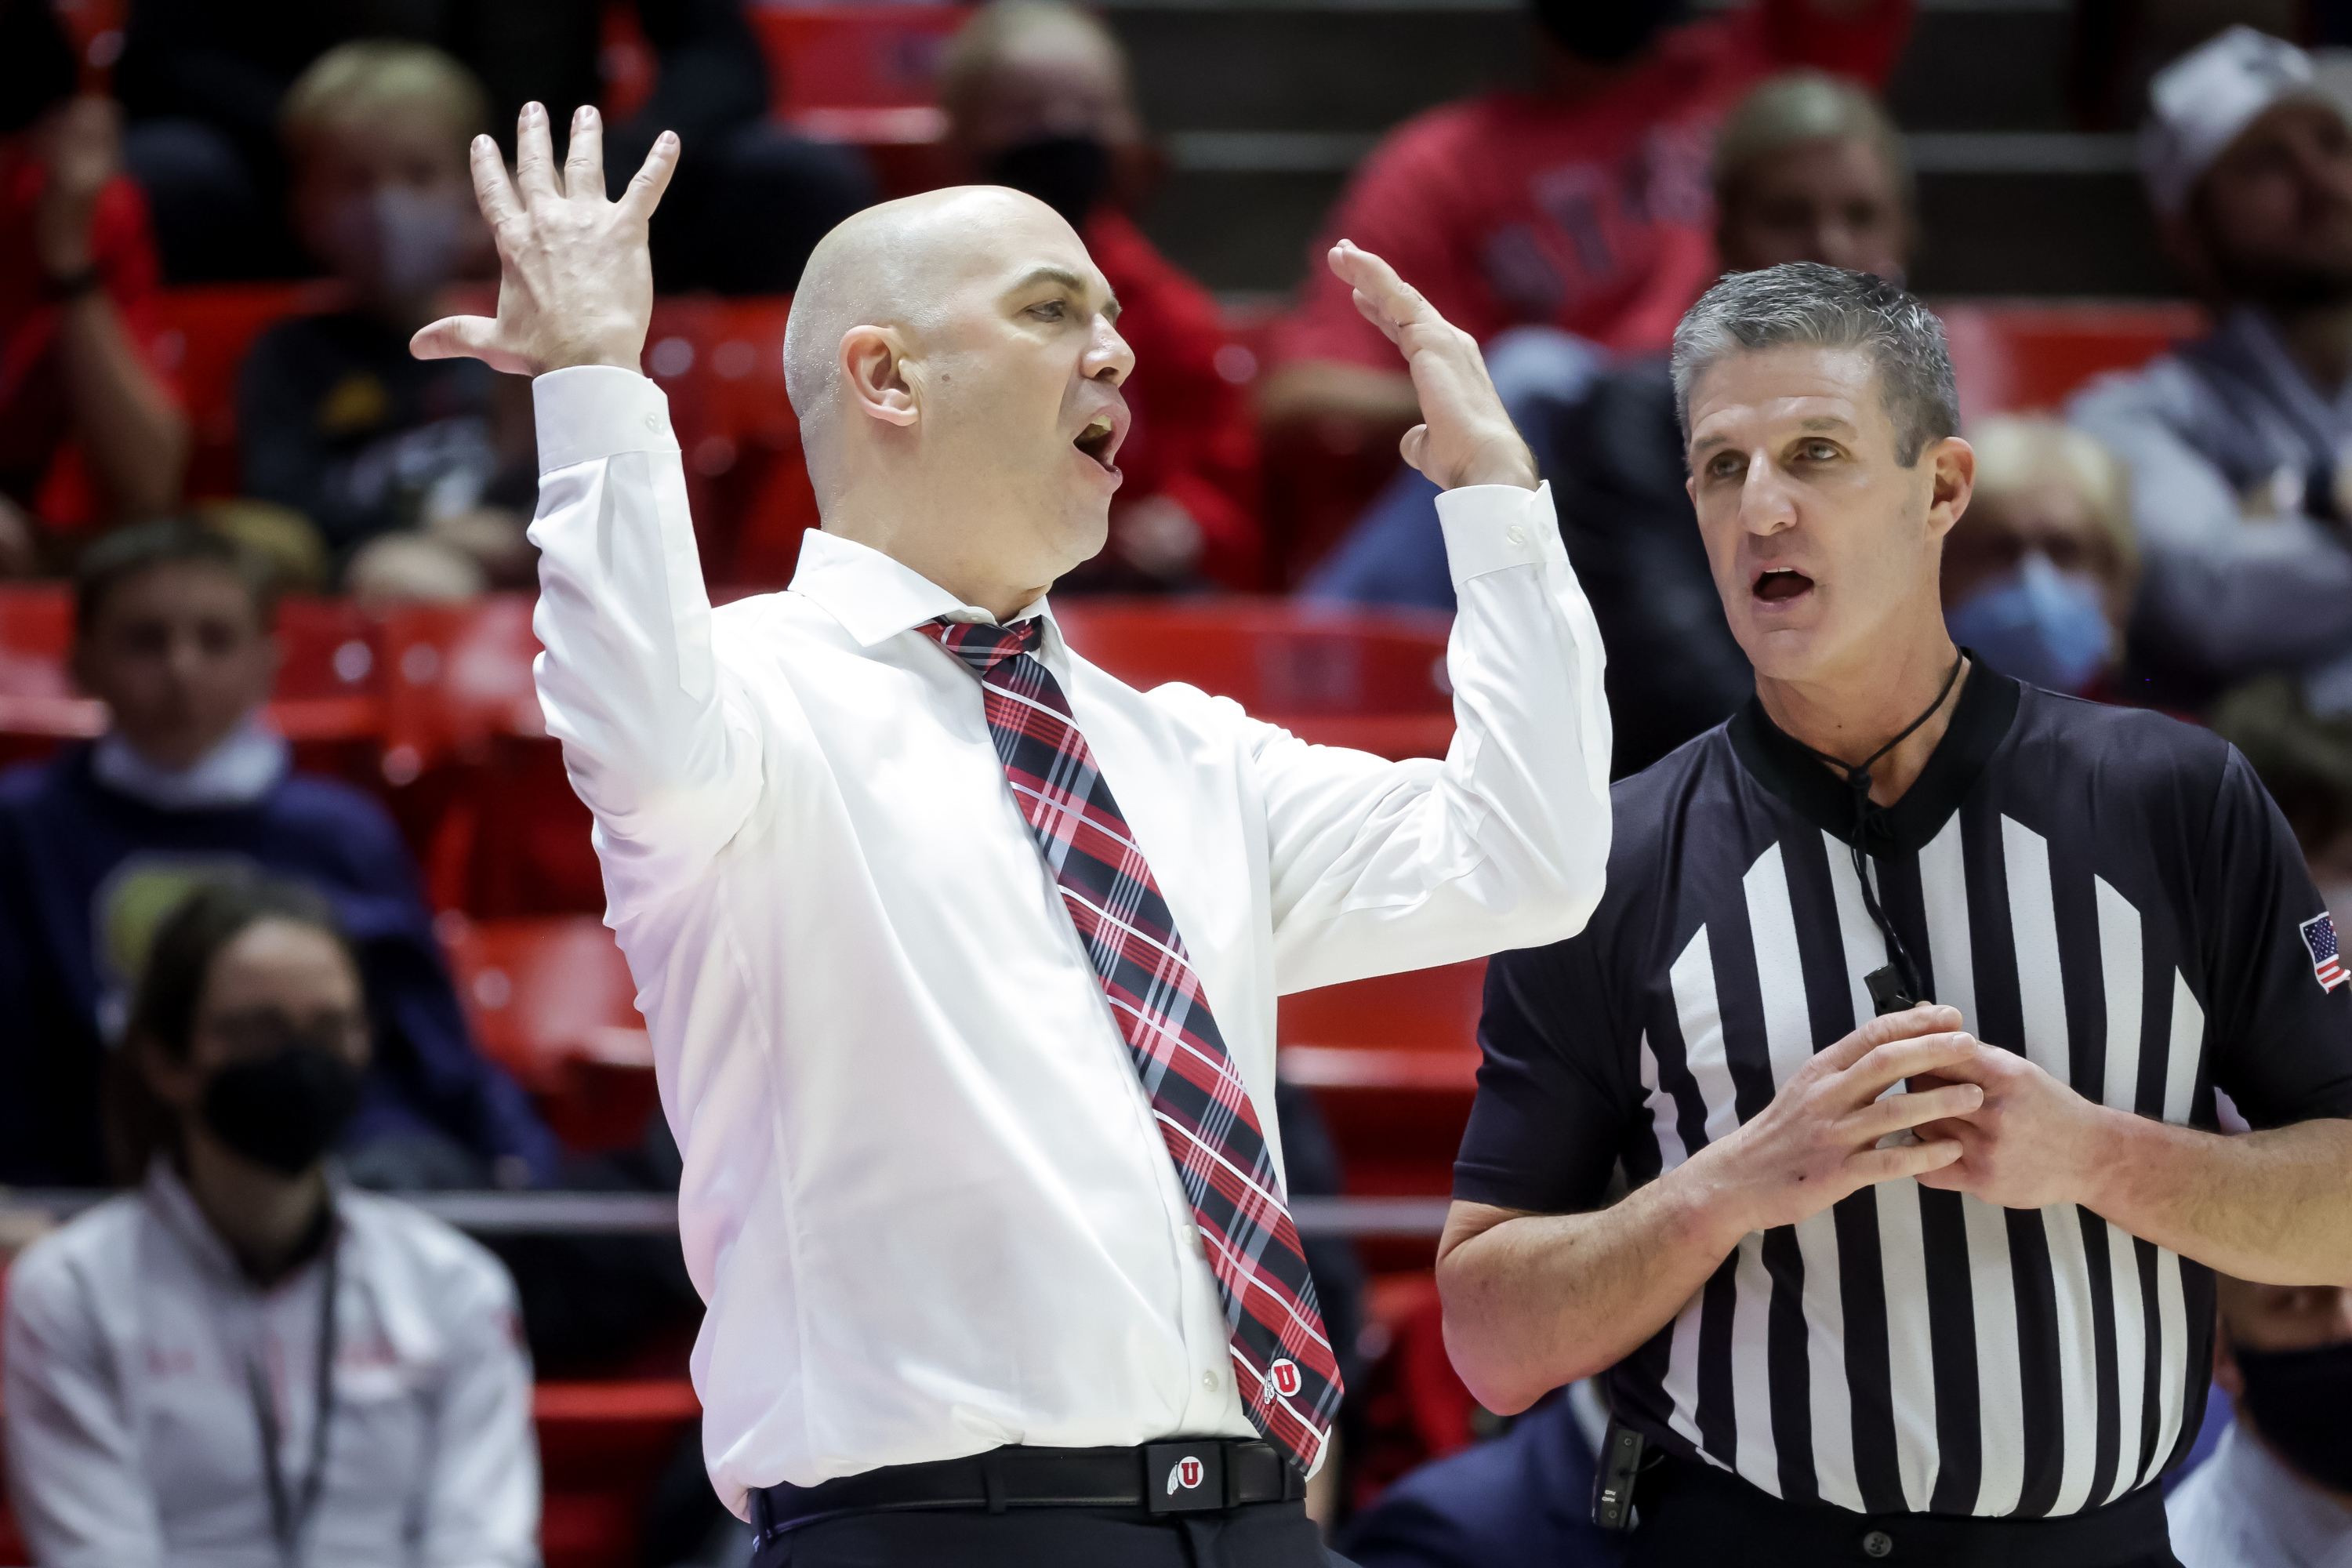 Utah Utes head coach Craig Smith reacts to a call during the game against the Washington State Cougars at the Huntsman Center in Salt Lake City on Saturday, Jan. 8, 2022.